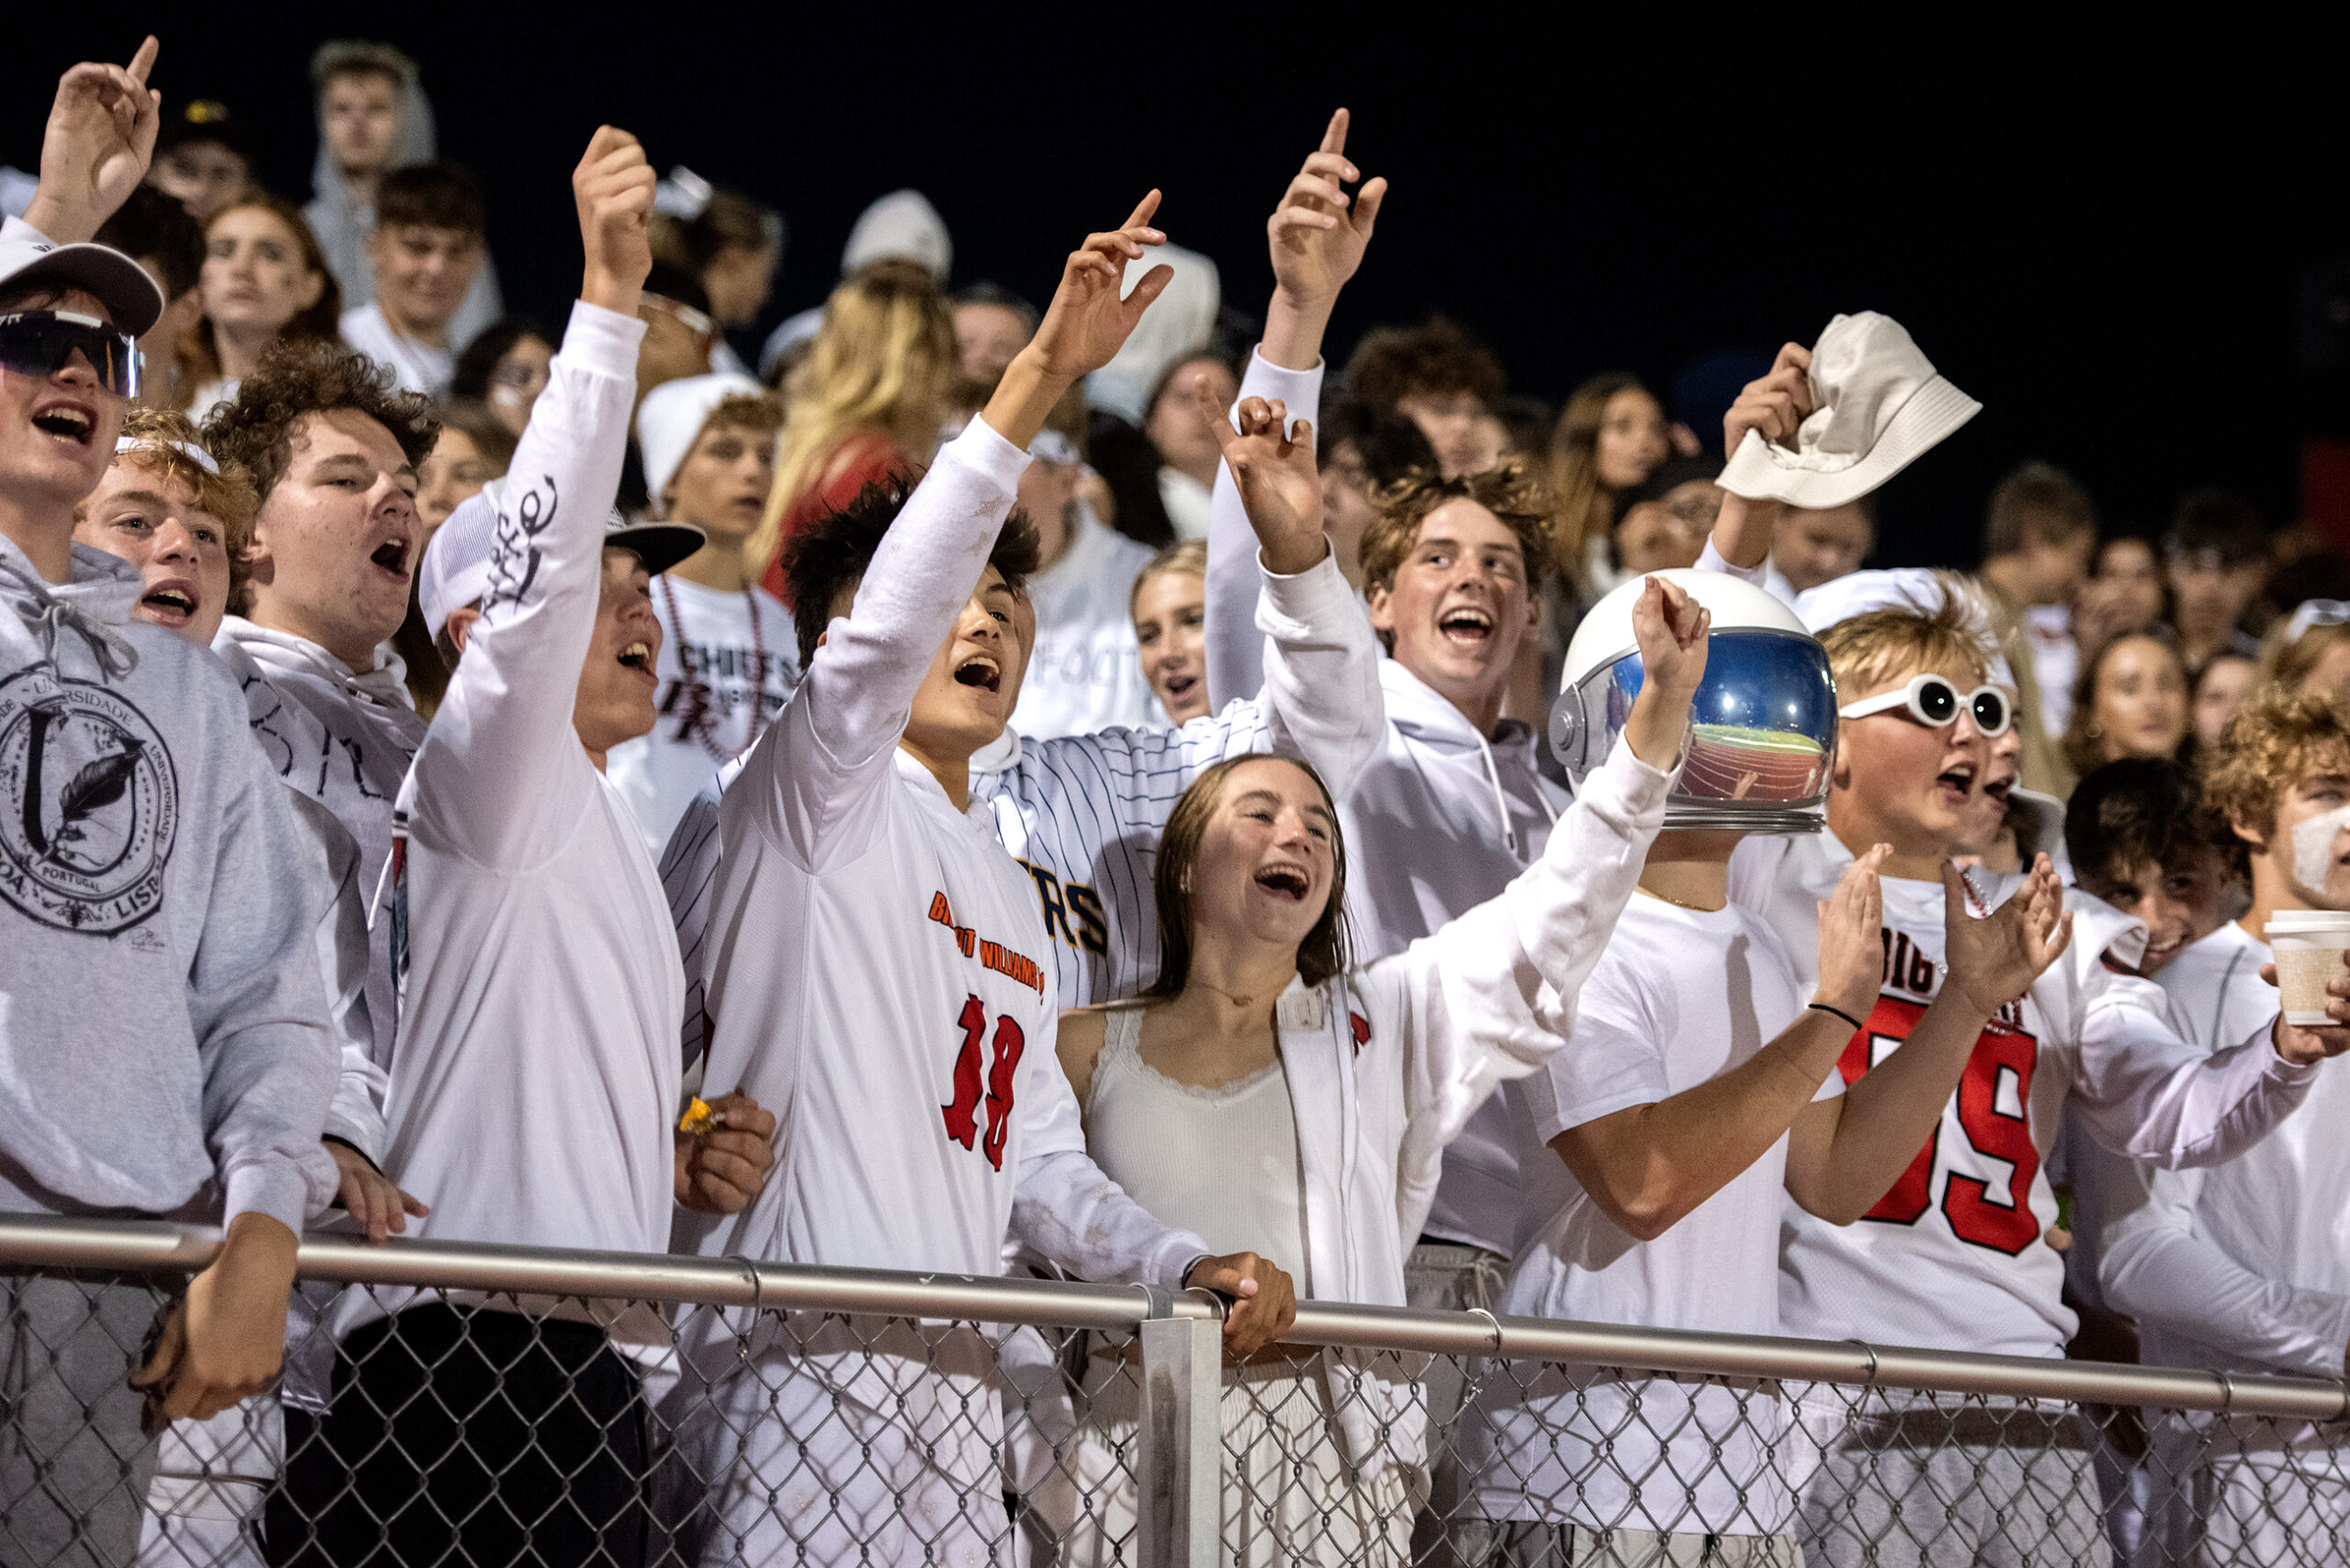 Students in white and red cheer from the stands.